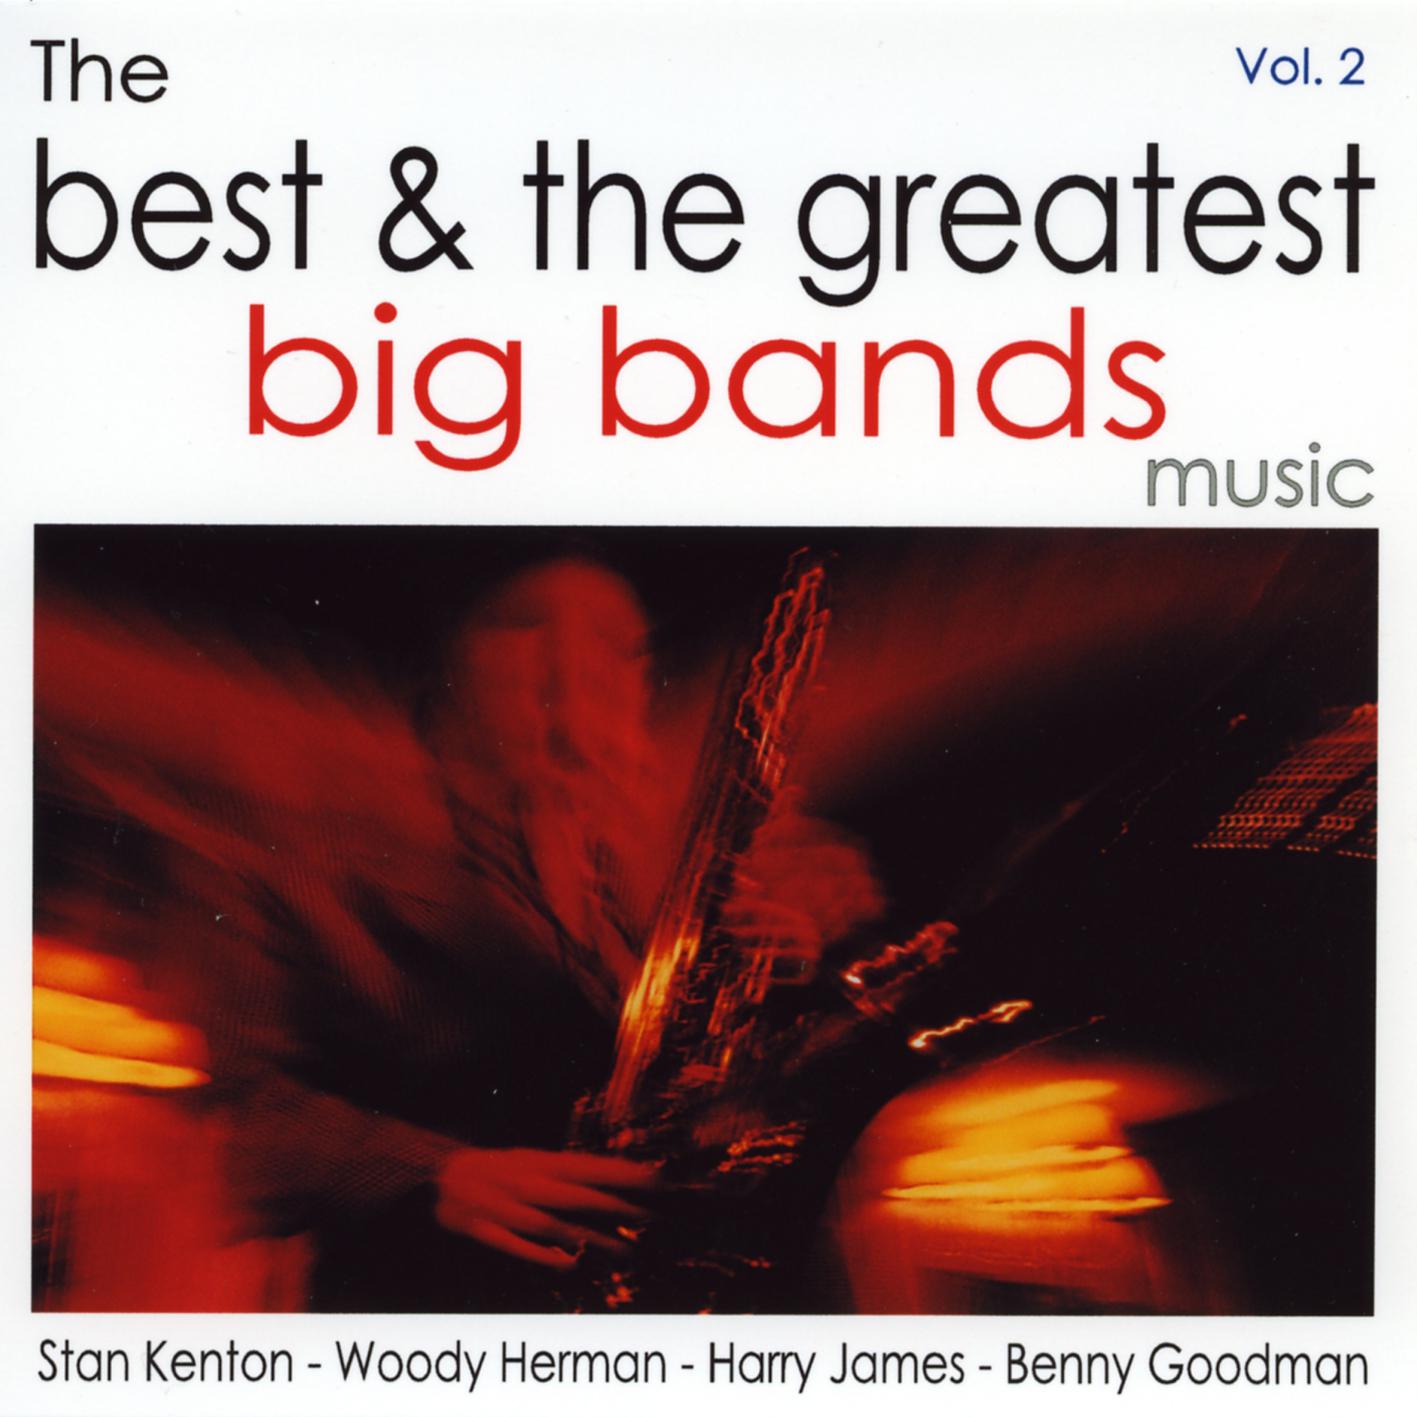 The Best & The Greatest Big Bands Vol.2